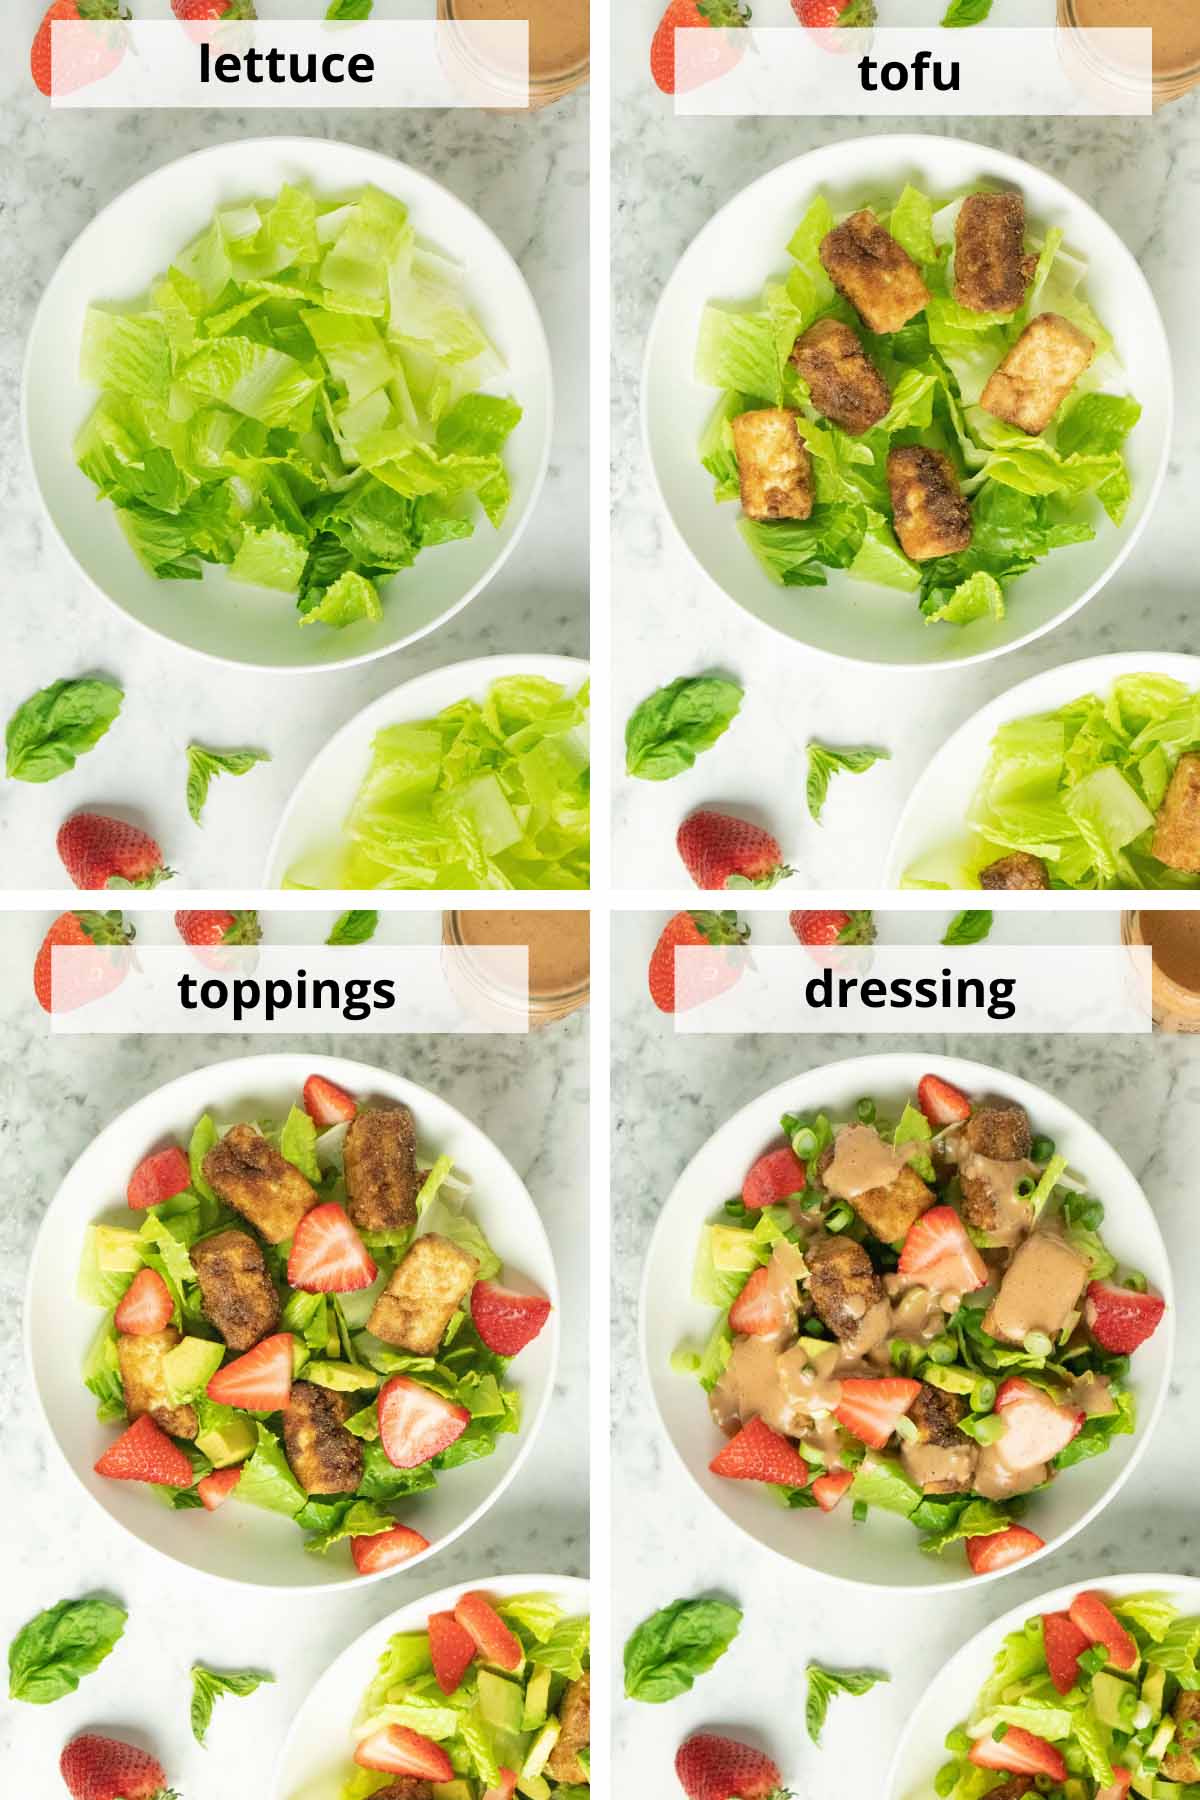 image collage showing a bowl of romaine lettuce, then with tofu added, then with strawberries and avocado added, then with the dressing on top